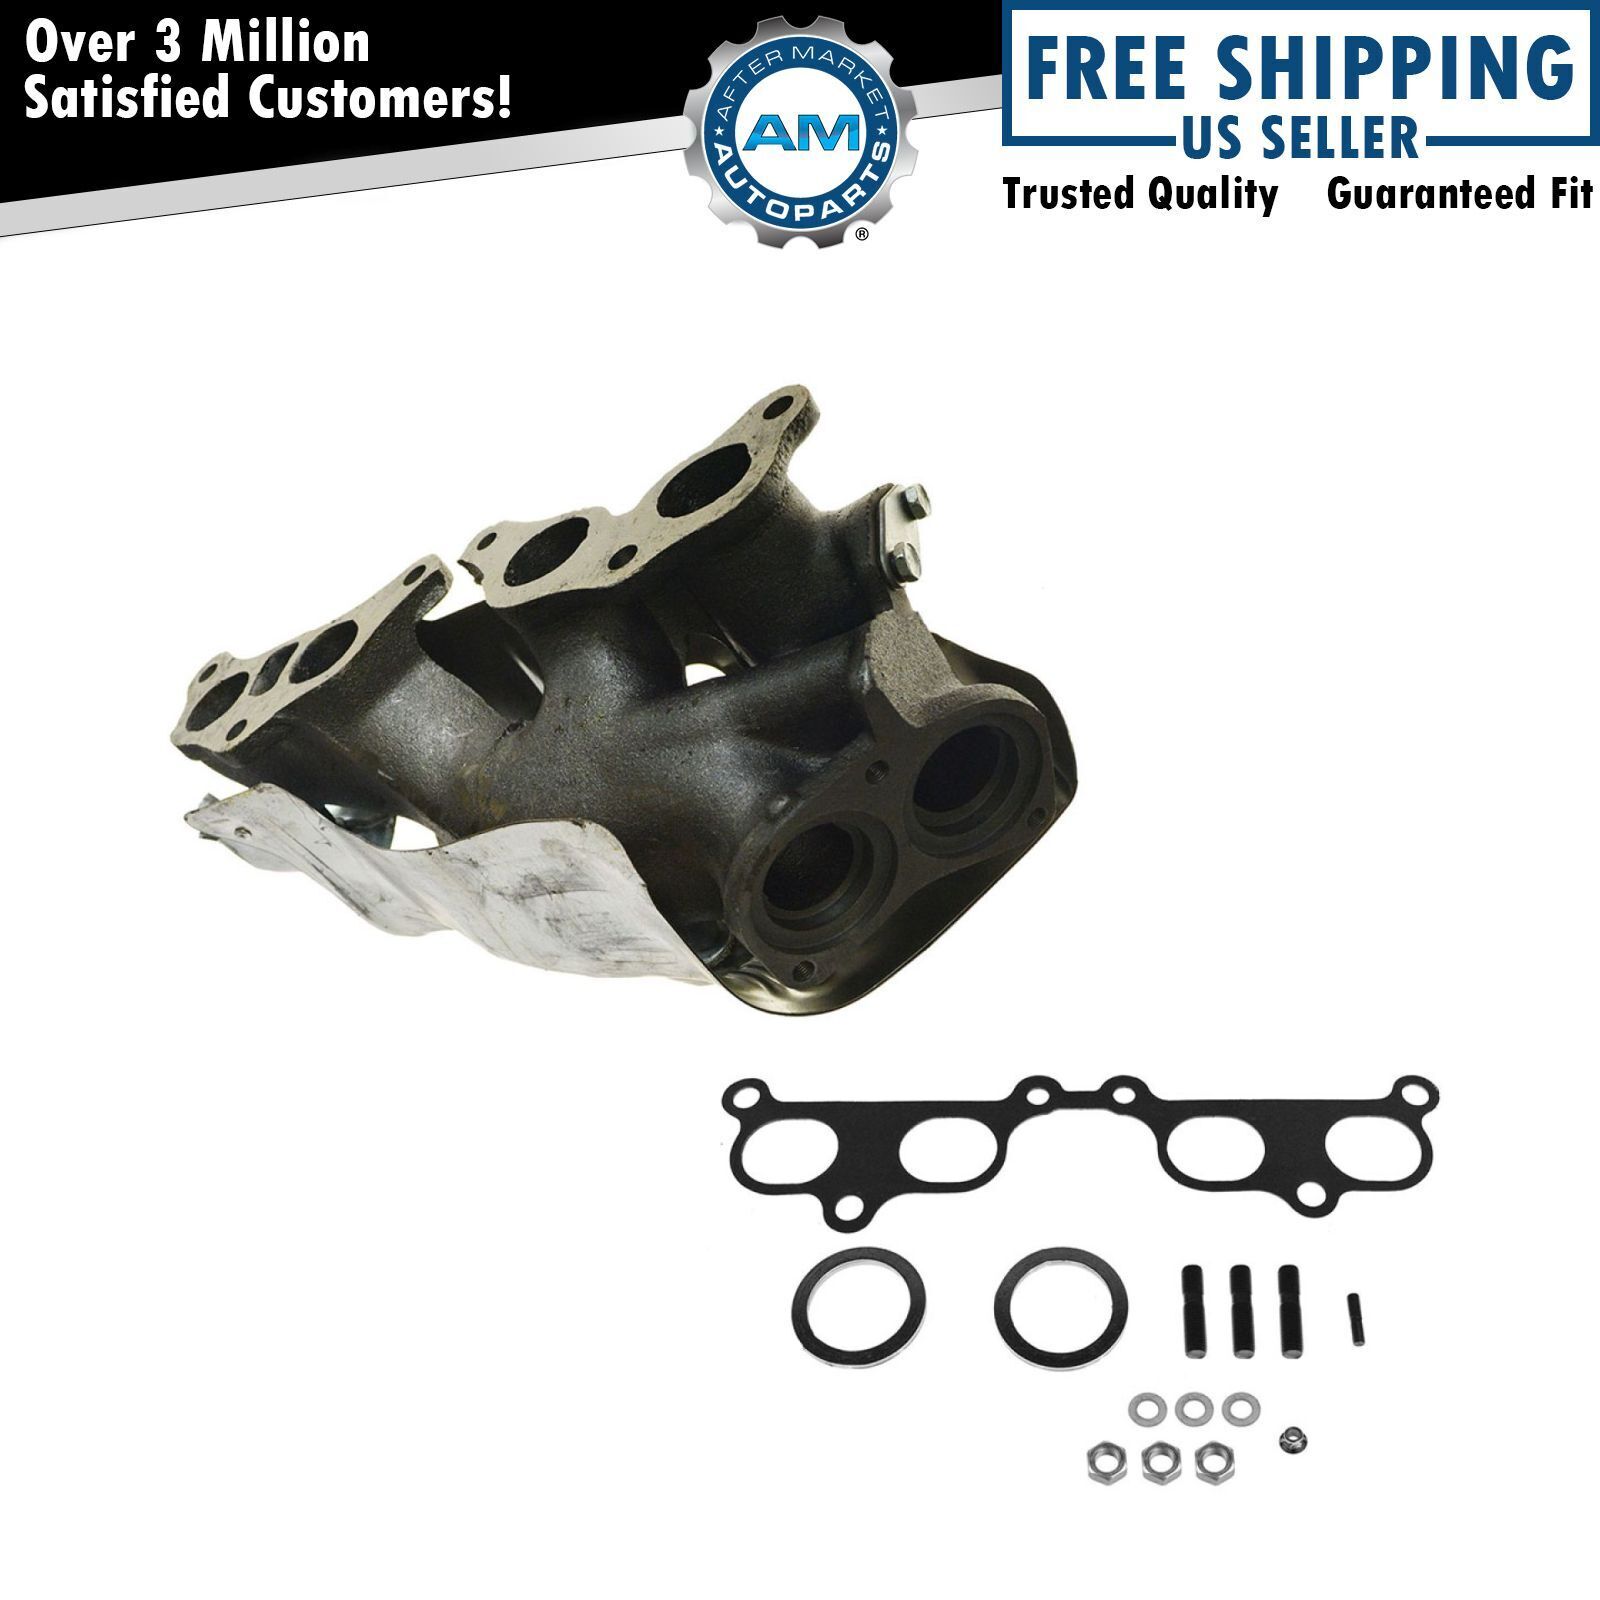 Exhaust Manifold & Gasket Kit for Toyota 4Runner Tacoma T100 Truck 2.4L 2.7L